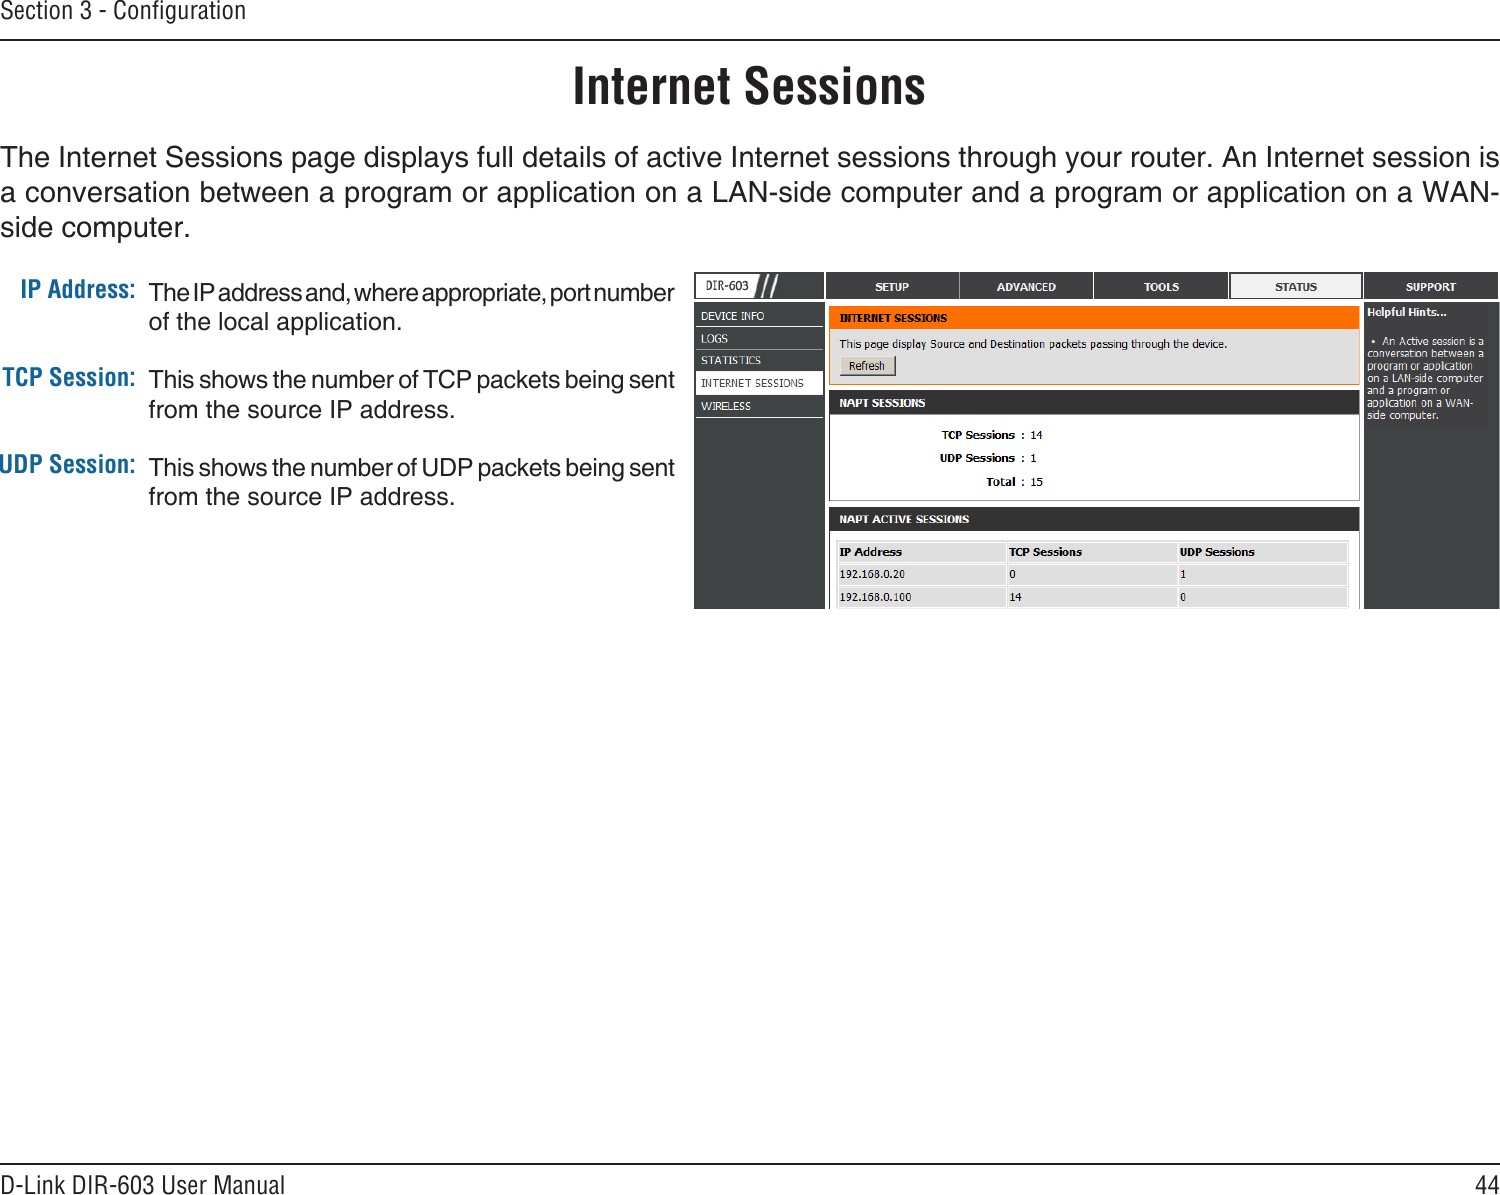 44D-Link DIR-603 User ManualSection 3 - CongurationInternet SessionsThe Internet Sessions page displays full details of active Internet sessions through your router. An Internet session is a conversation between a program or application on a LAN-side computer and a program or application on a WAN-side computer. IP Address:TCP Session:UDP Session:The IP address and, where appropriate, port number of the local application. This shows the number of TCP packets being sent from the source IP address.This shows the number of UDP packets being sent from the source IP address.